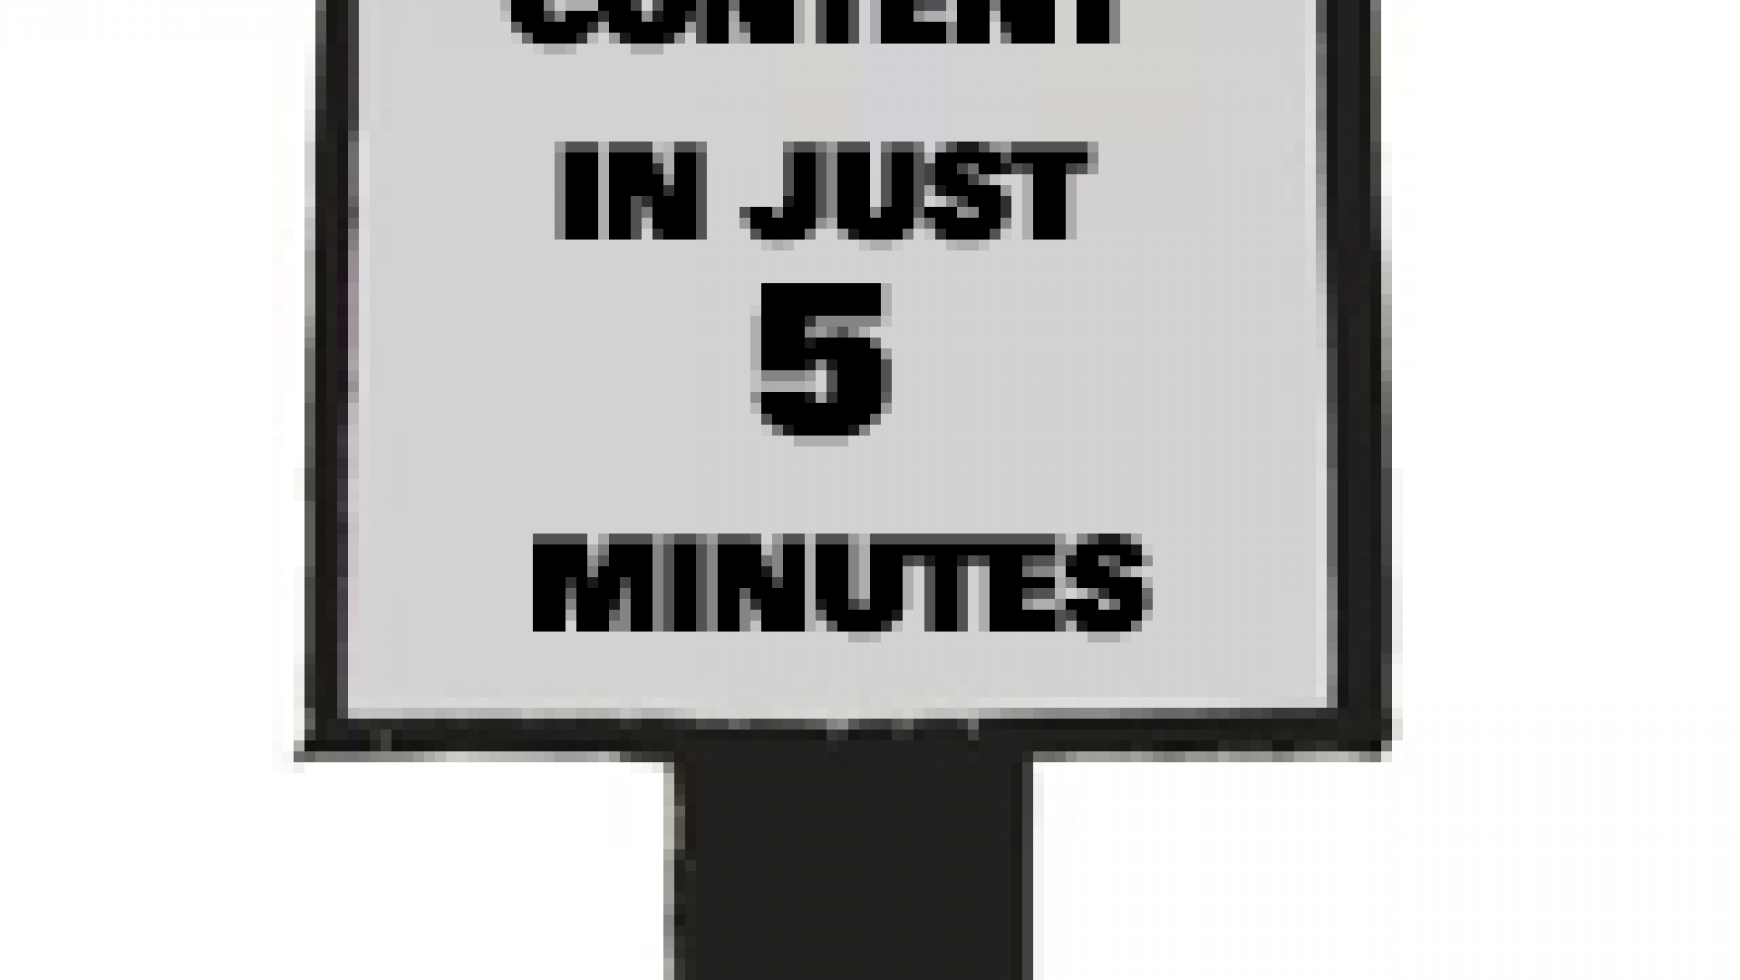 HOW TO CREATE BRAND NEW CONTENT IN JUST 5 MINUTES (ETHICALLY!)